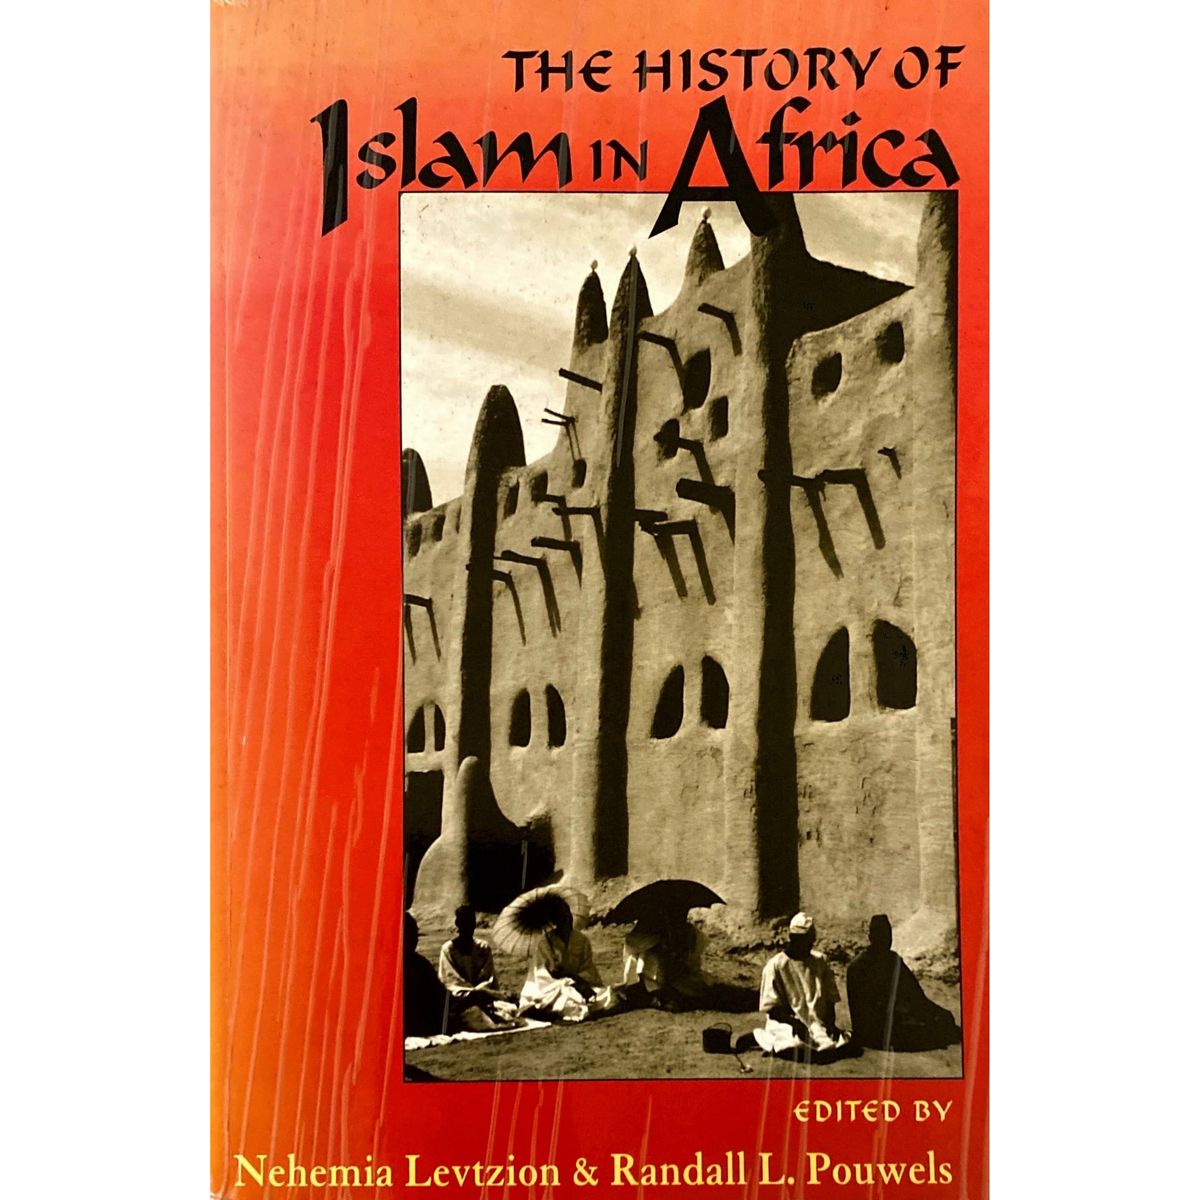 ISBN: 9780864864543 / 086486454X - The History of Islam in Africa by N. Levtzion and R.L. Pouwels [2000]